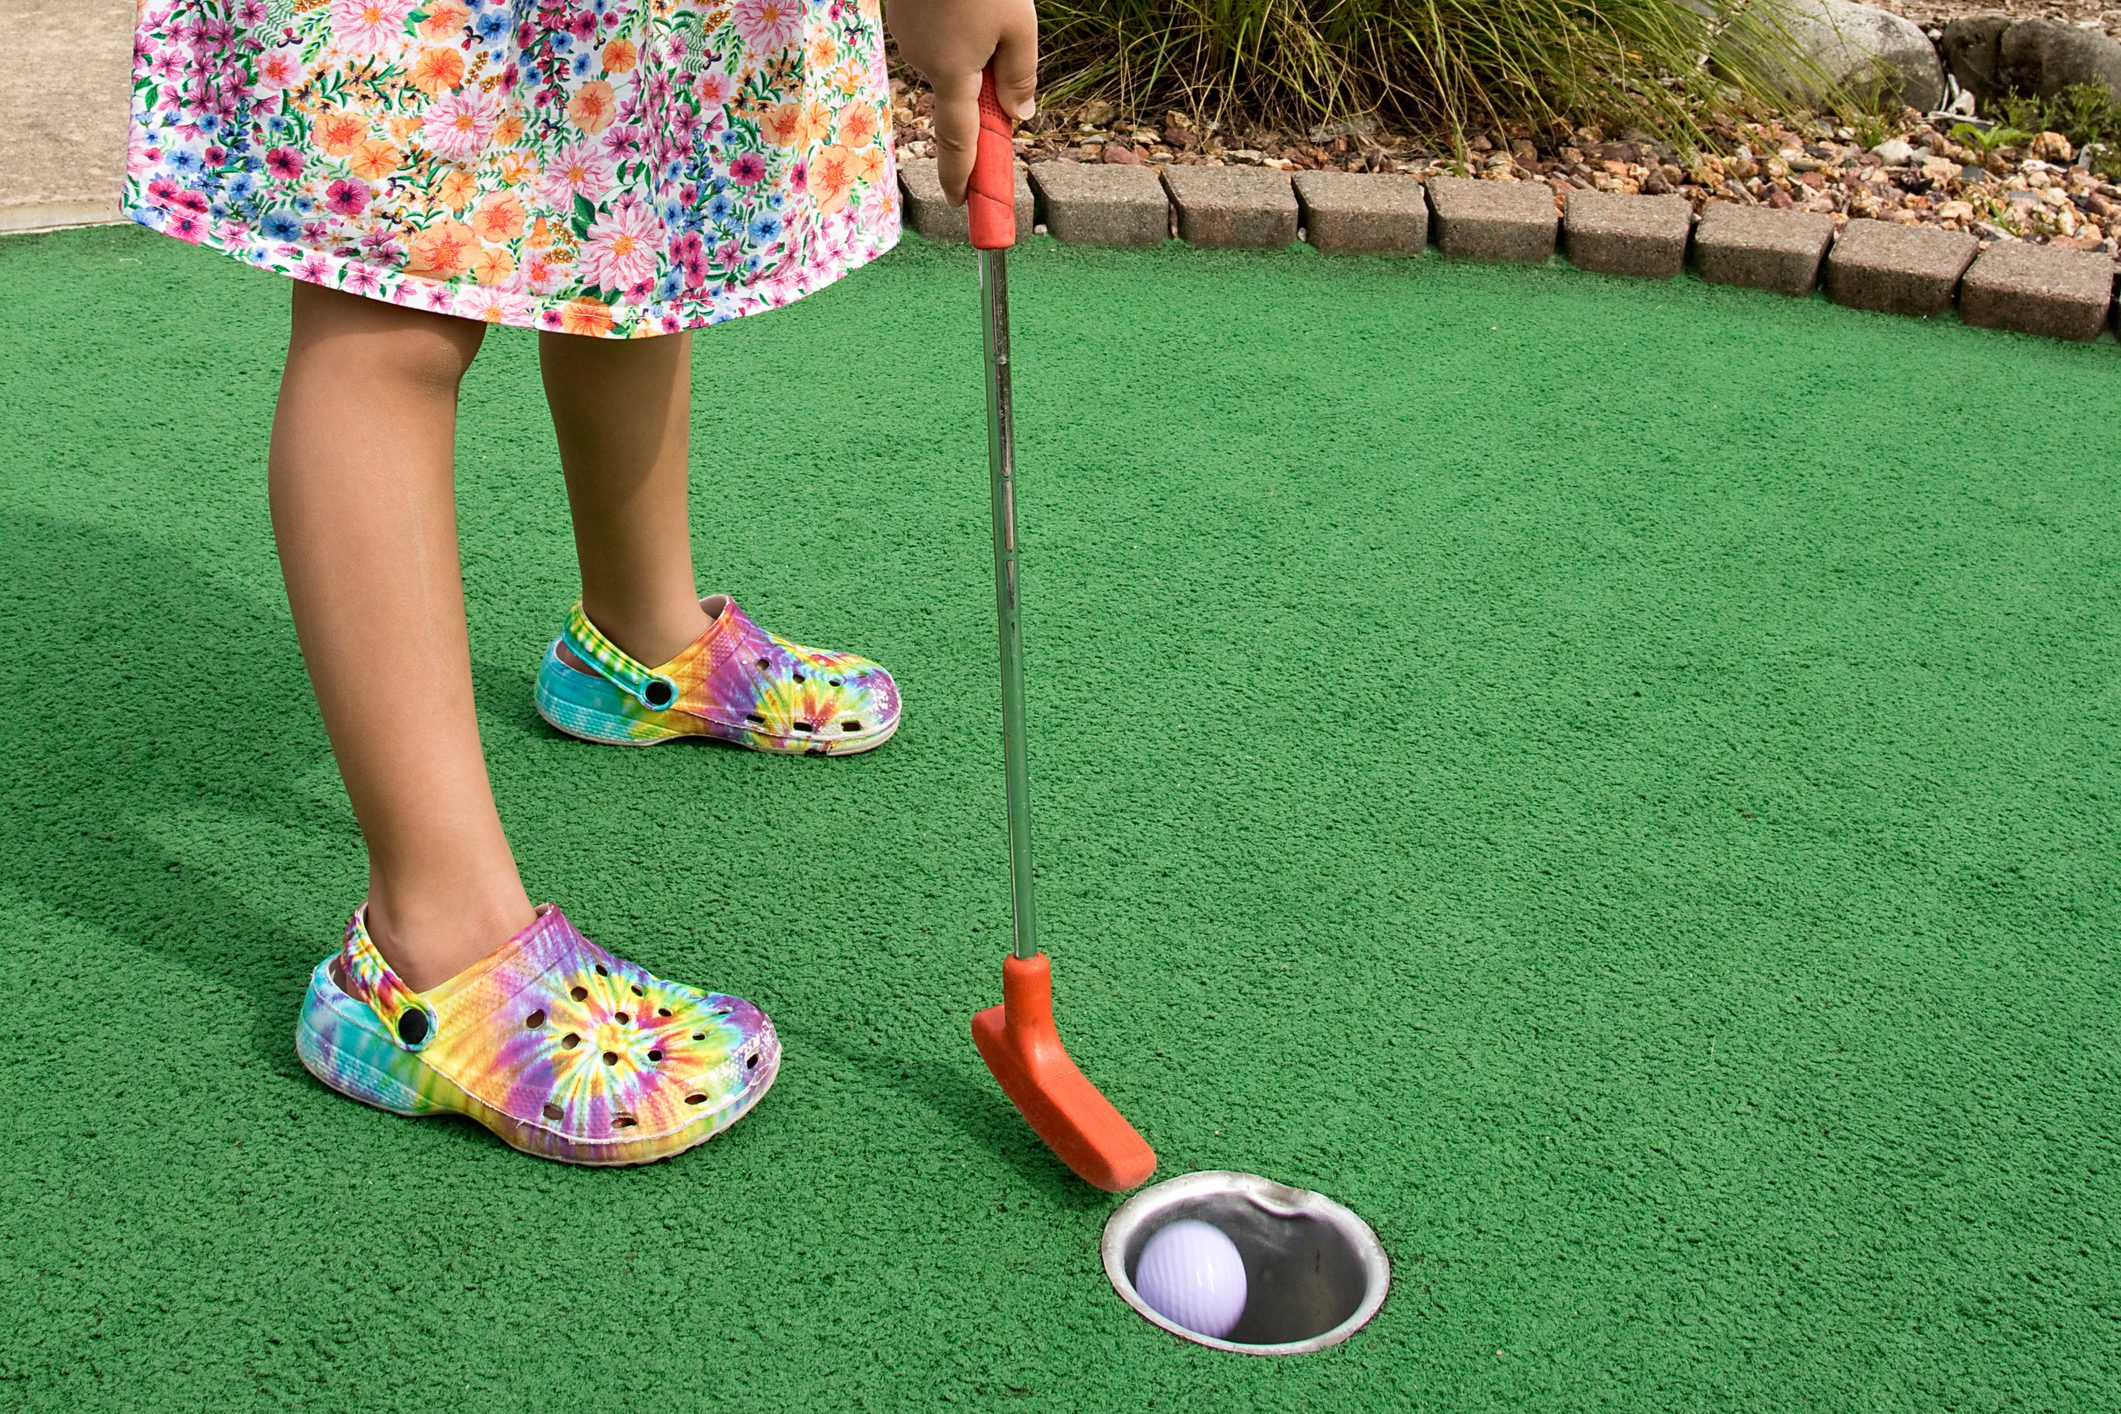 Little girl putting at mini golf. It’s in the Hole